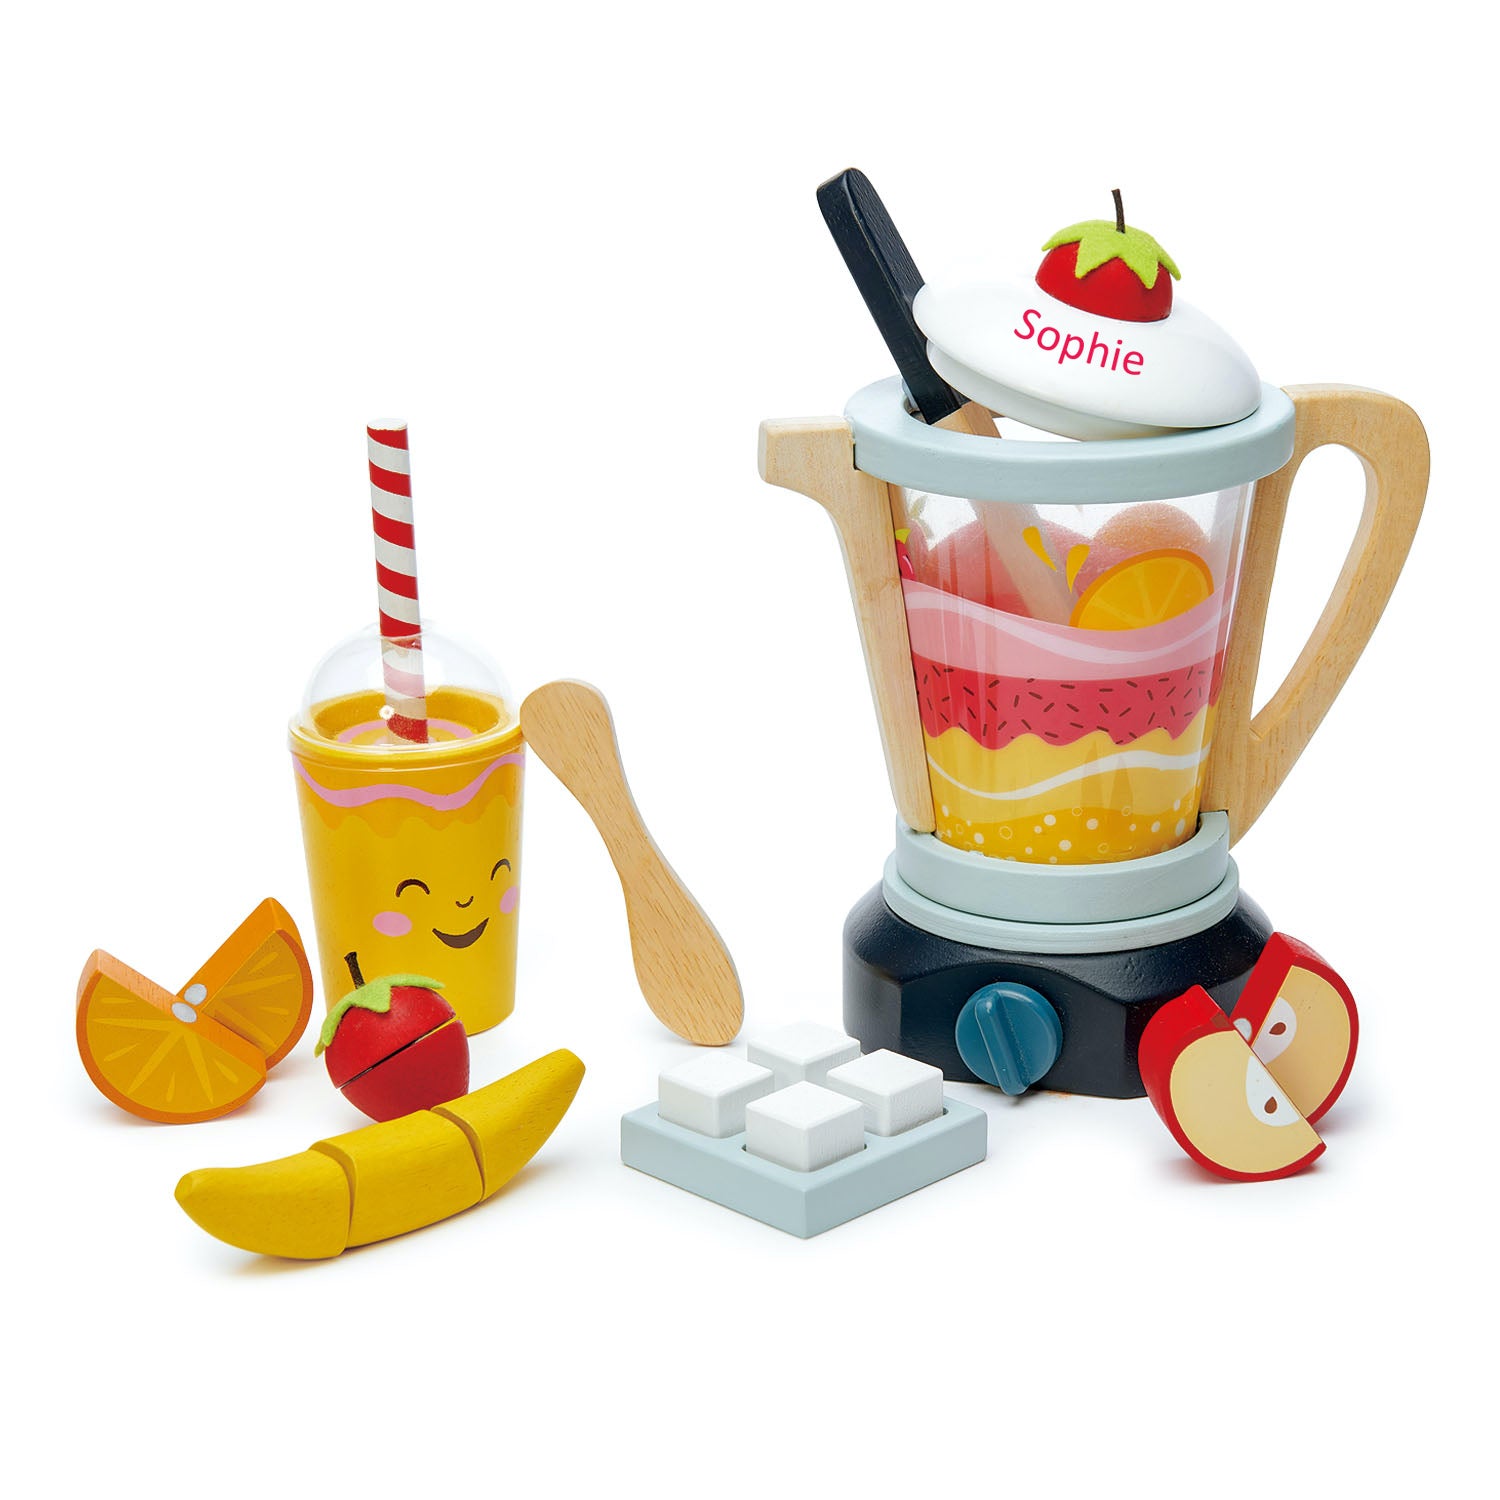 Personalised Wooden Smoothie Maker Set (6537643982928)